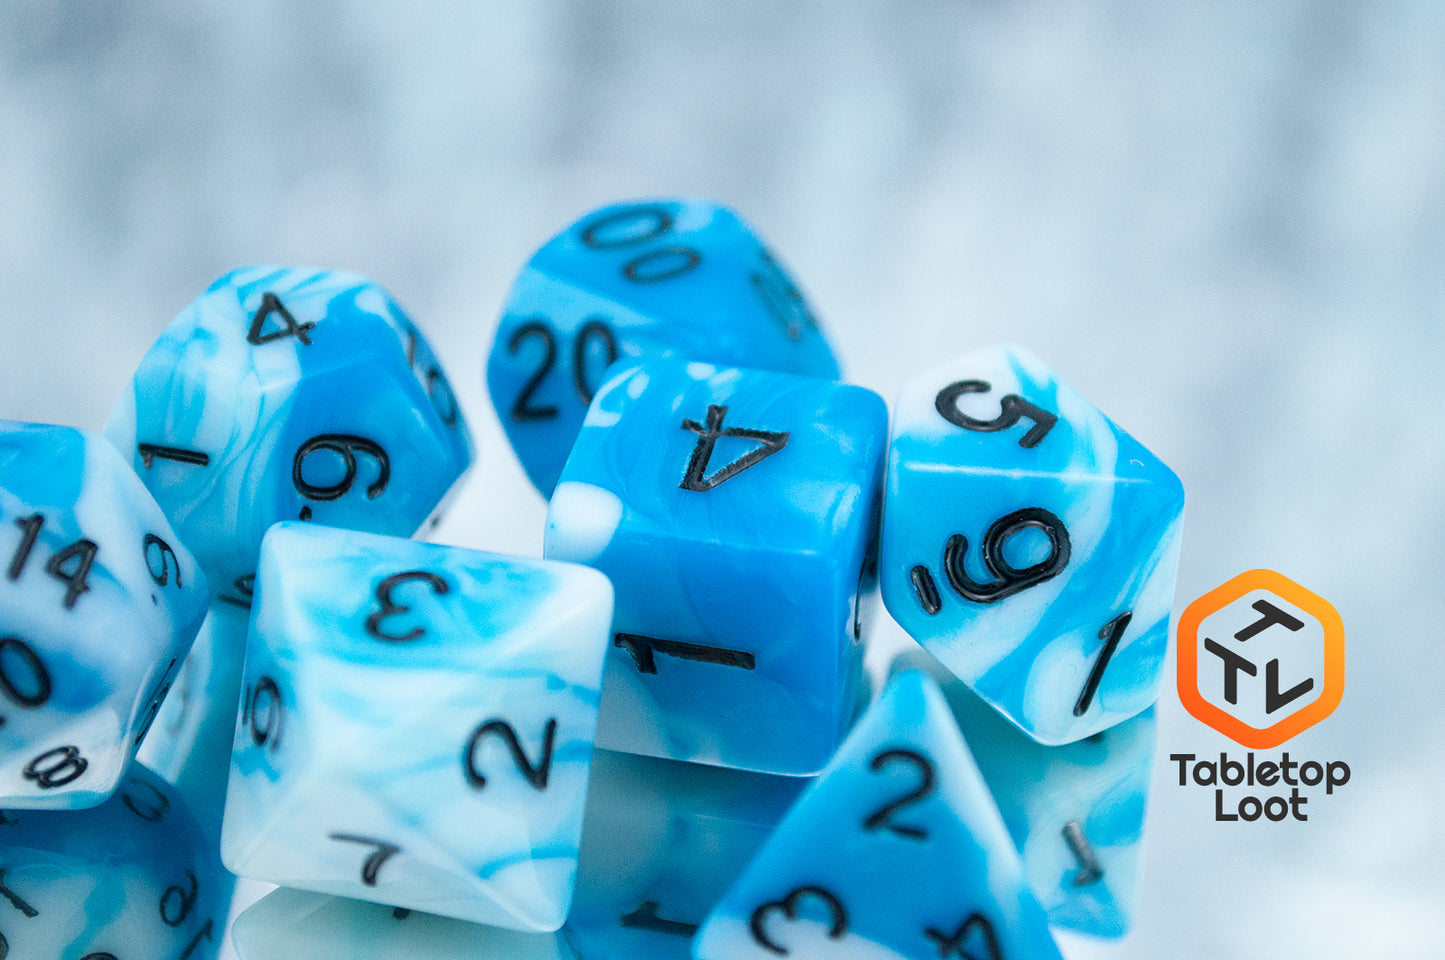 A close up of the Cloudy Sky 7 piece dice set from Tabletop Loot with swirls of bright blue and white resin and black numbering.